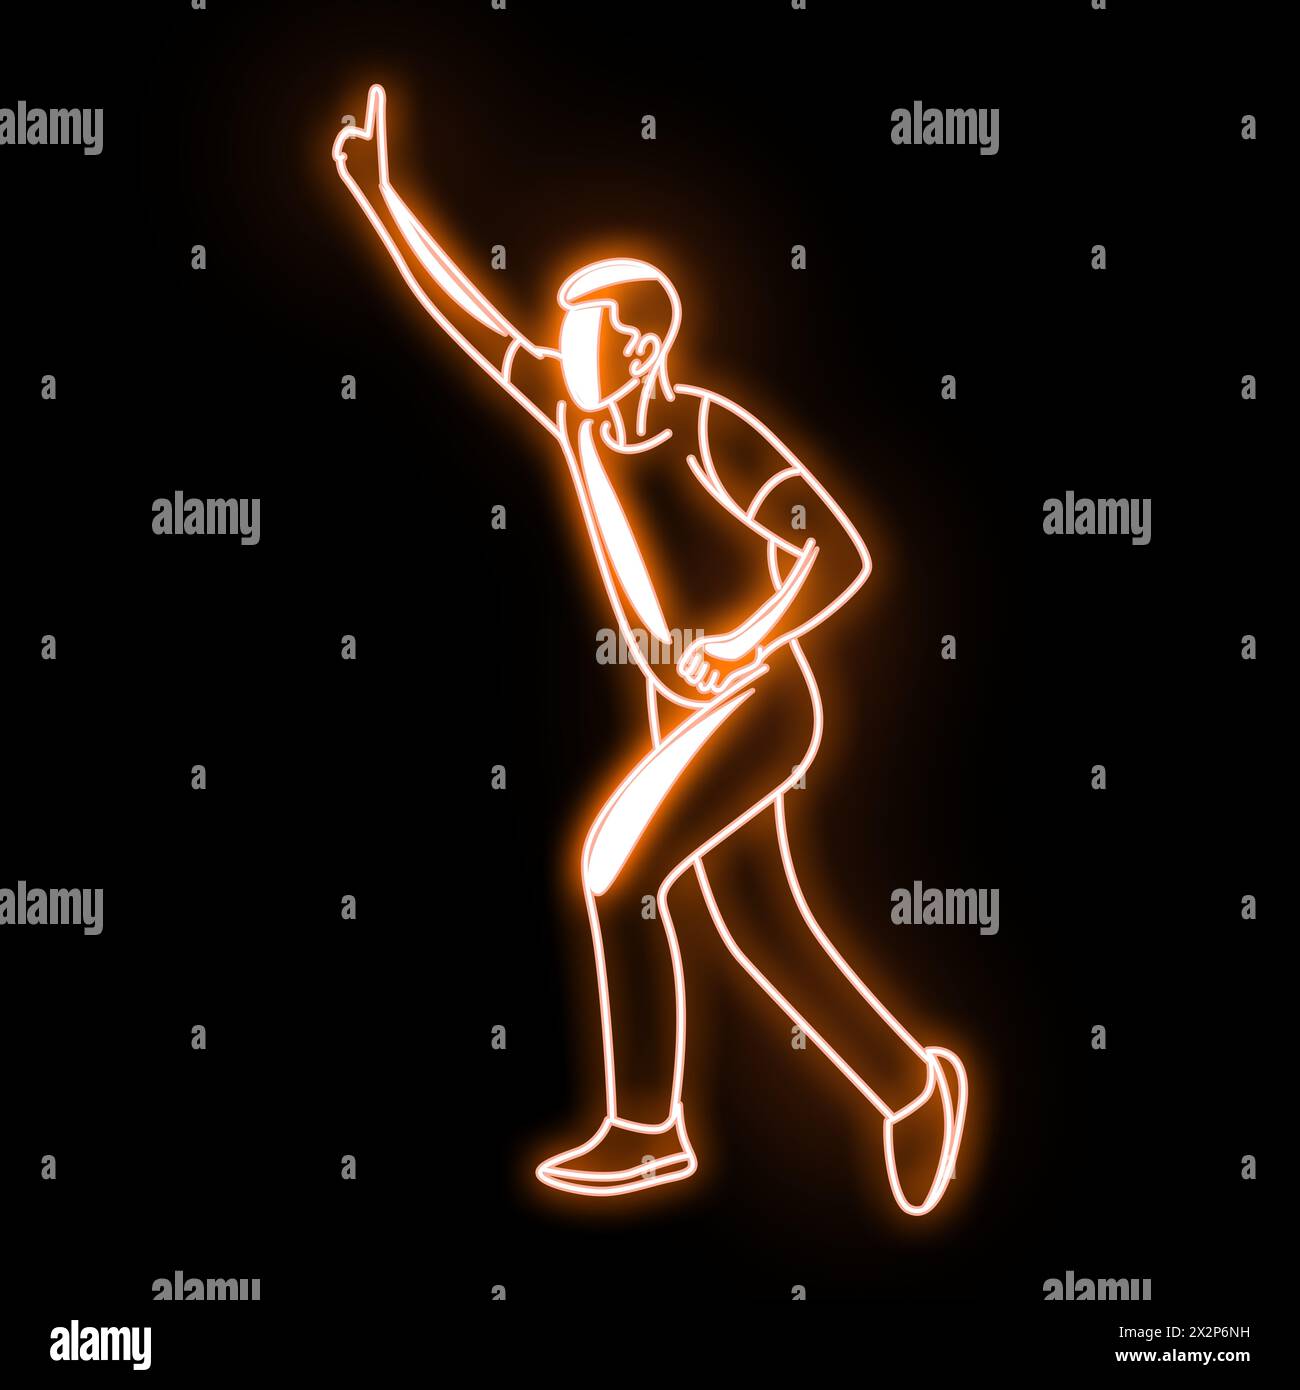 Bowler bowling in cricket championship sports. Cricket Fast Bowler, neon light effect, dark full dark background. cricket bowler in action. Neon glow Stock Photo